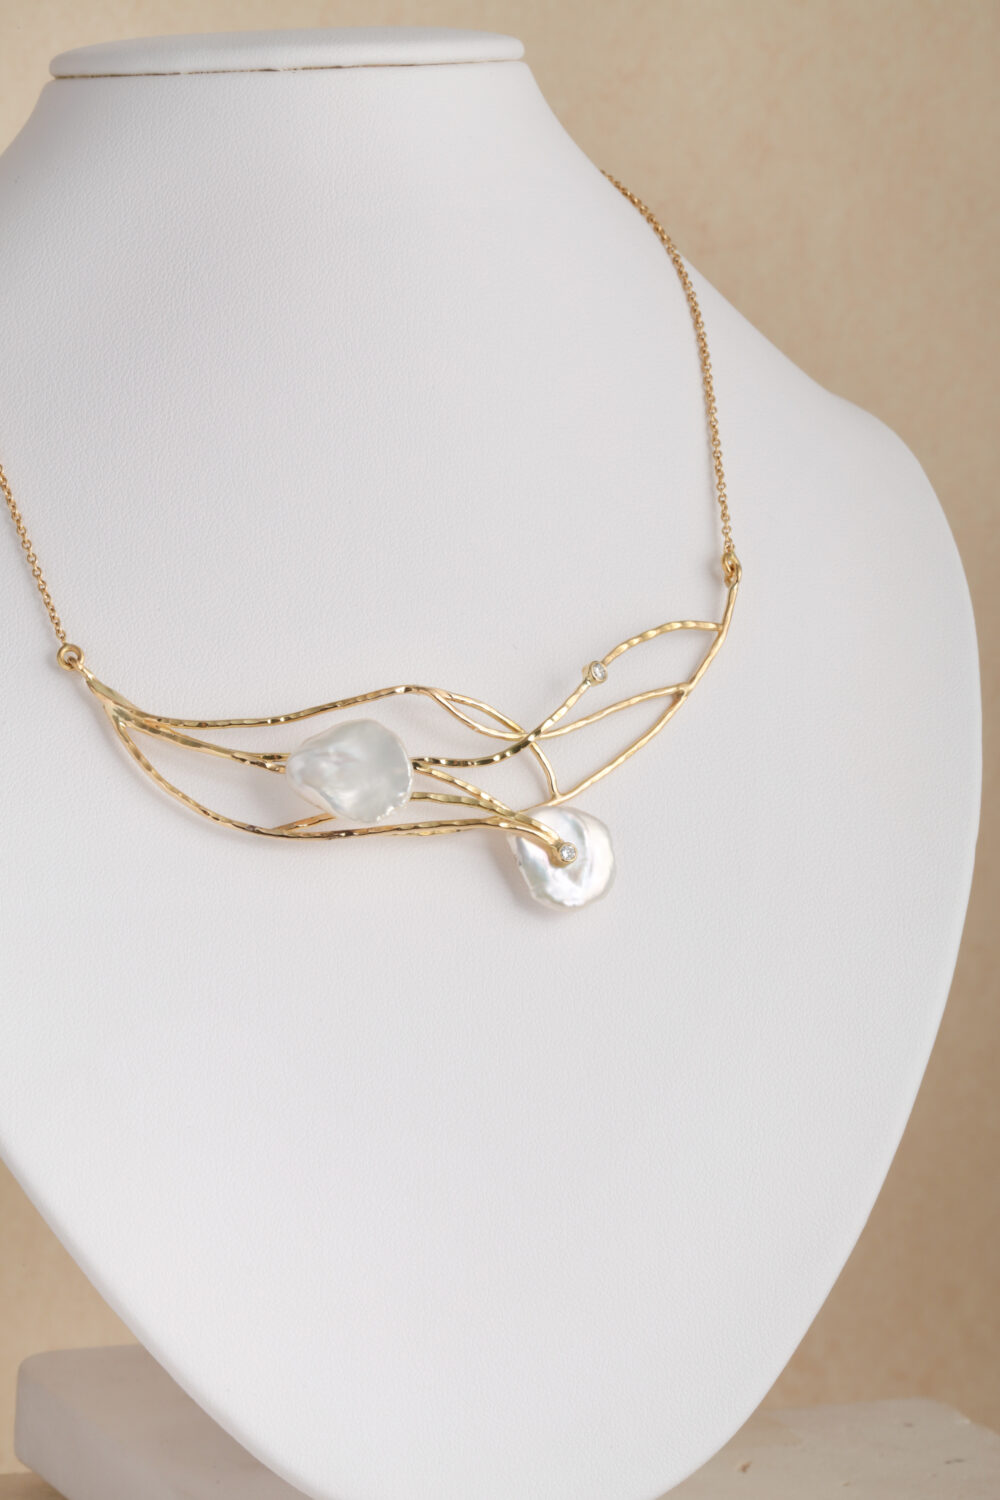 Necklace crafted from 18-karat yellow gold set with two brilliant cut diamonds and two baroque, natural pearl gemstones.